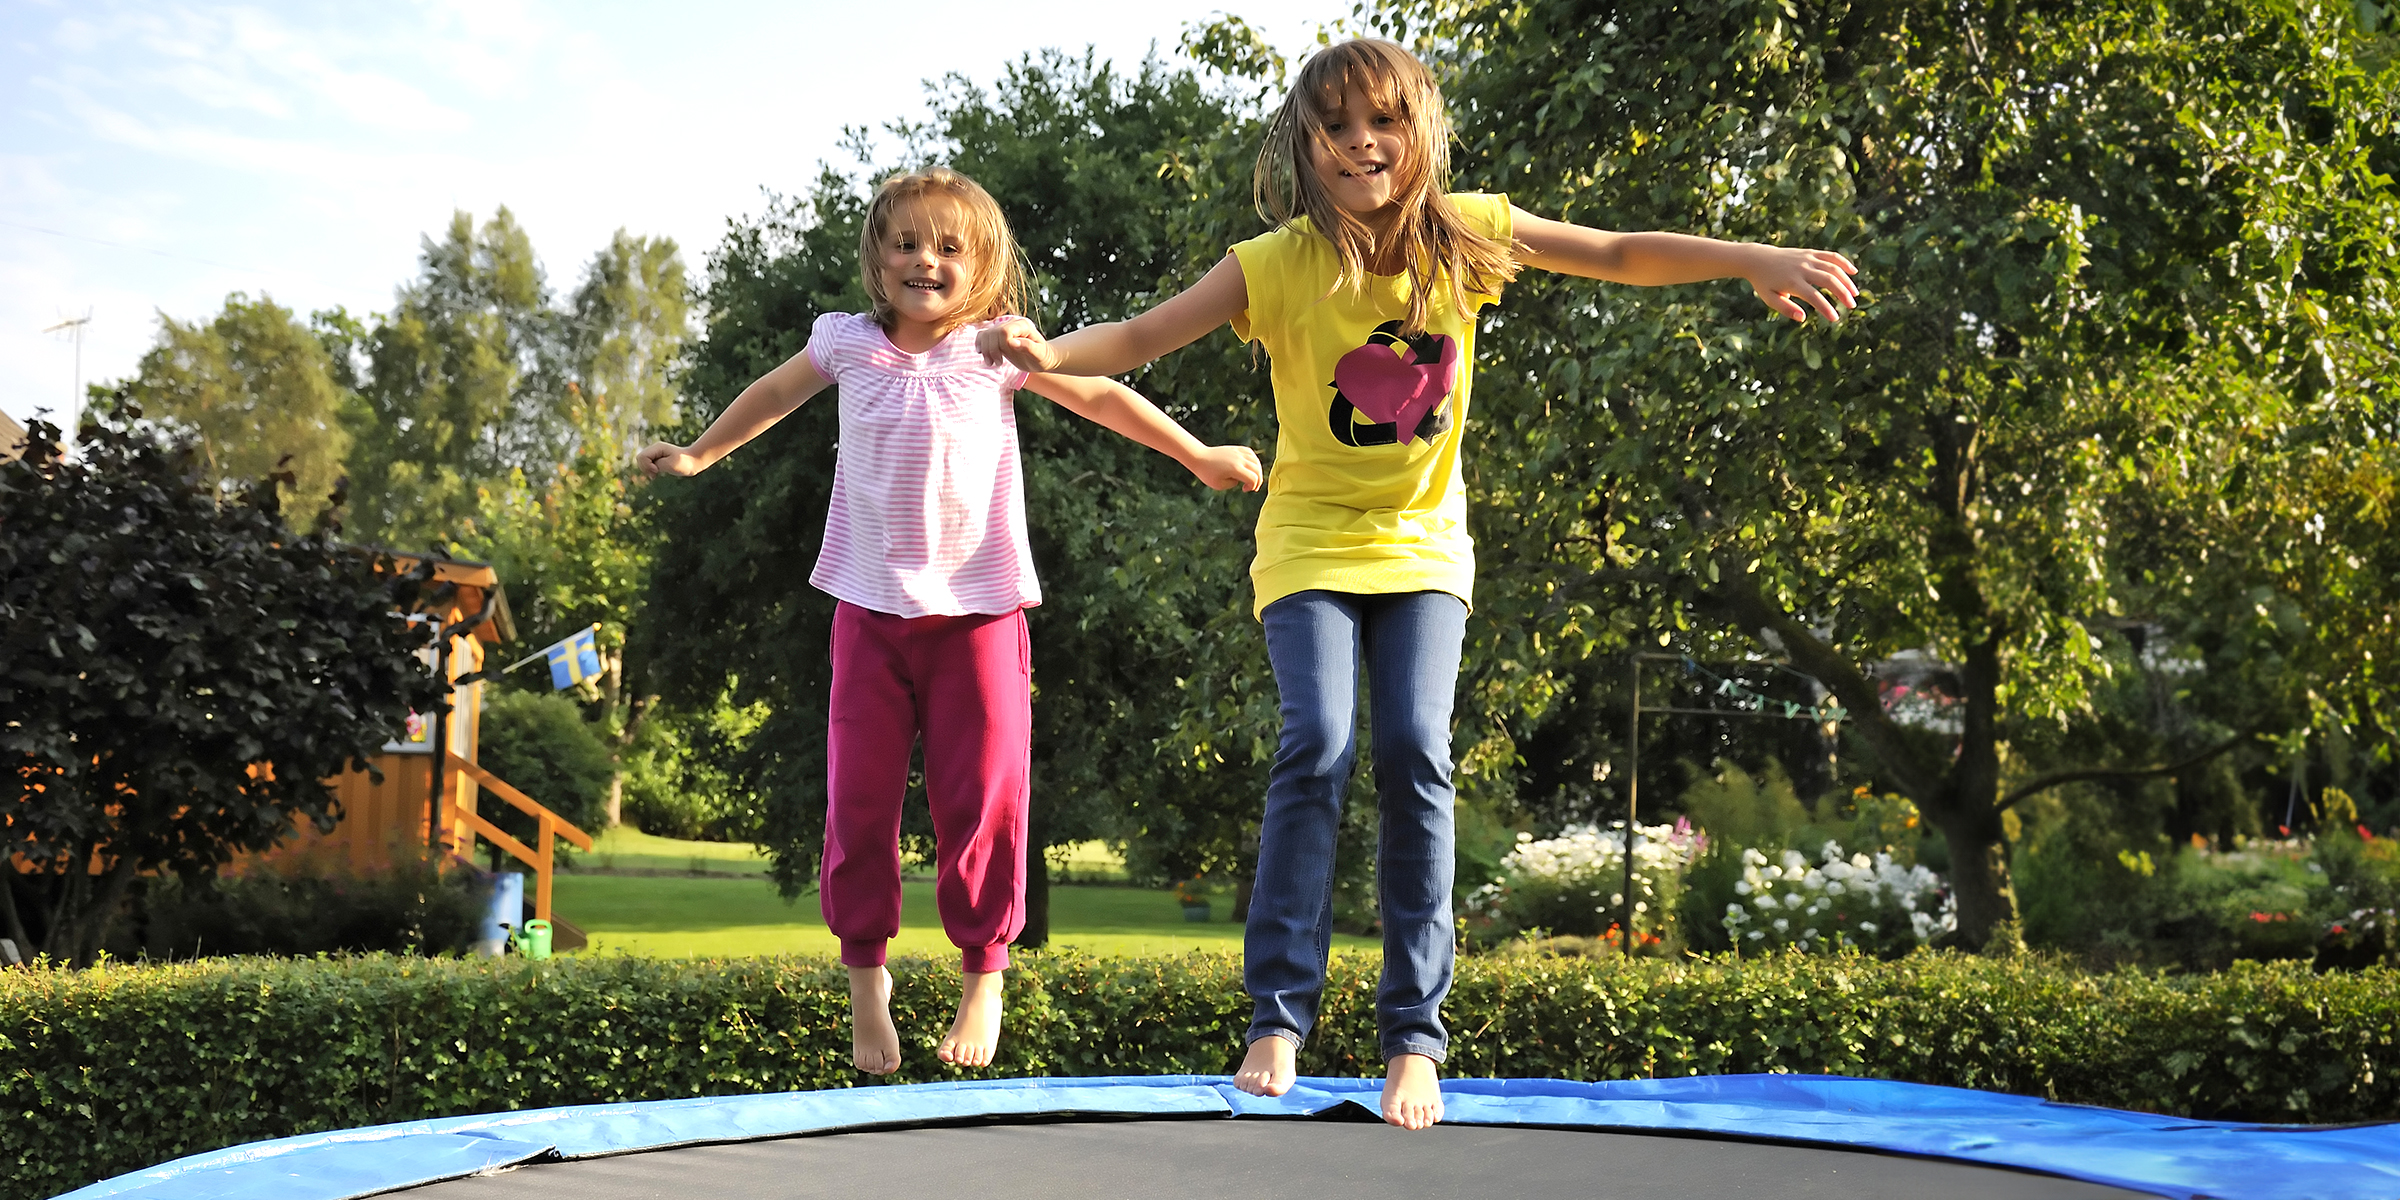 Two kids jumping on a trampoline | Source: Shutterstock